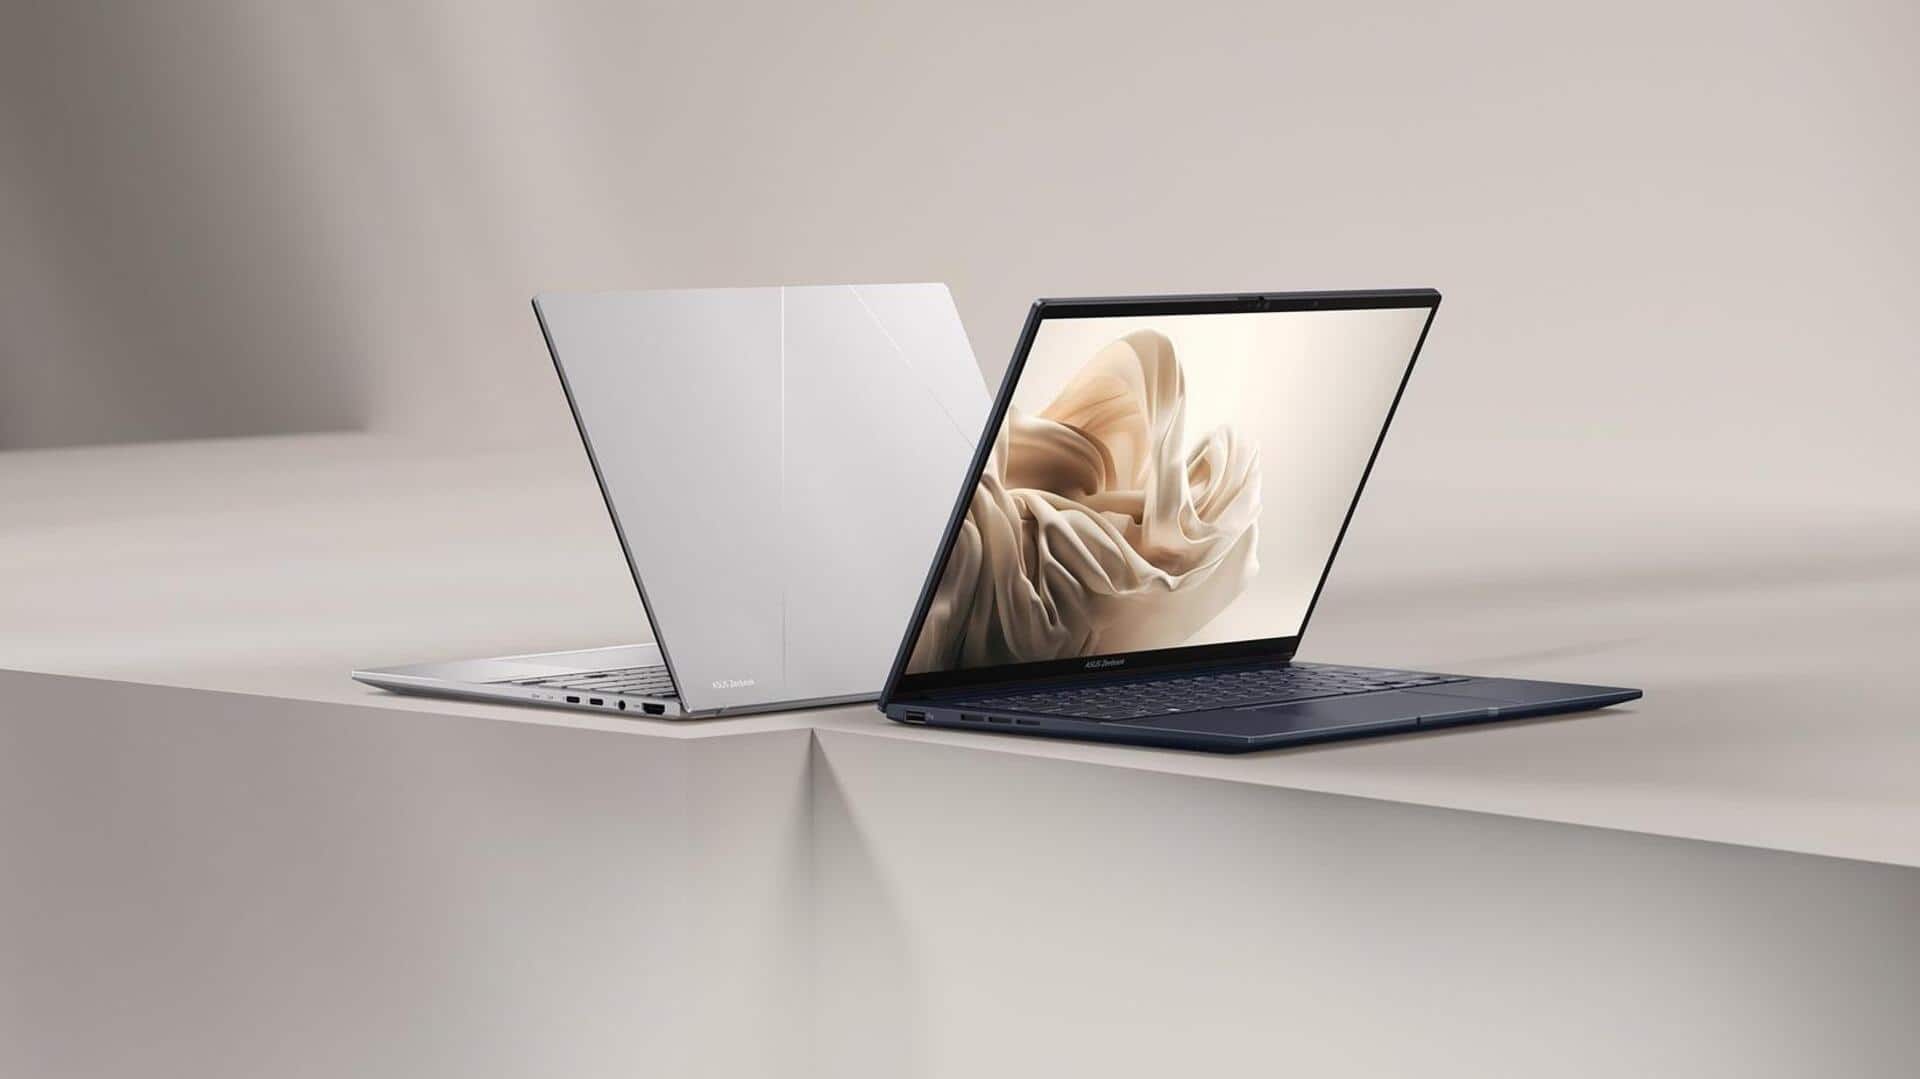 ASUS Zenbook 14 OLED laptop breaks cover: Check features